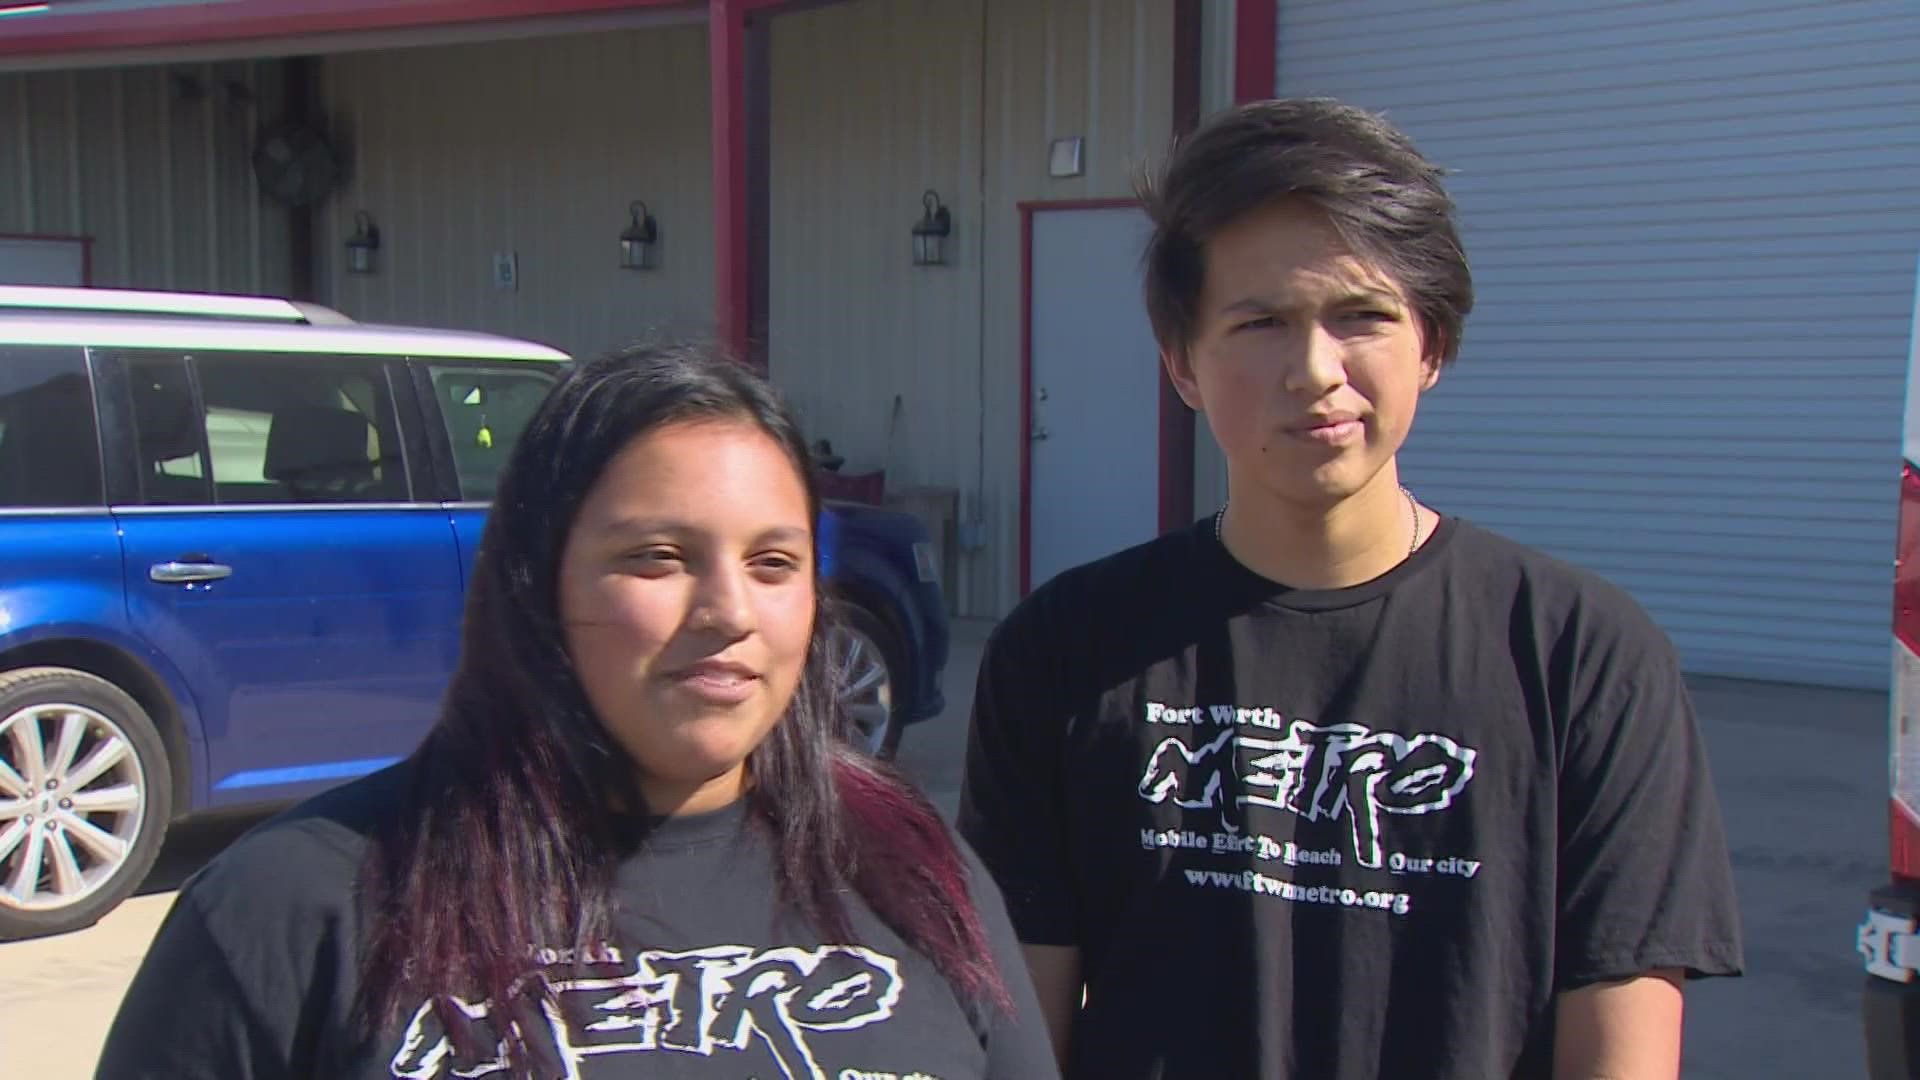 Dash and Gabby Calzada's goal is to collect and donate turkeys to 500 families in South and East Fort Worth.